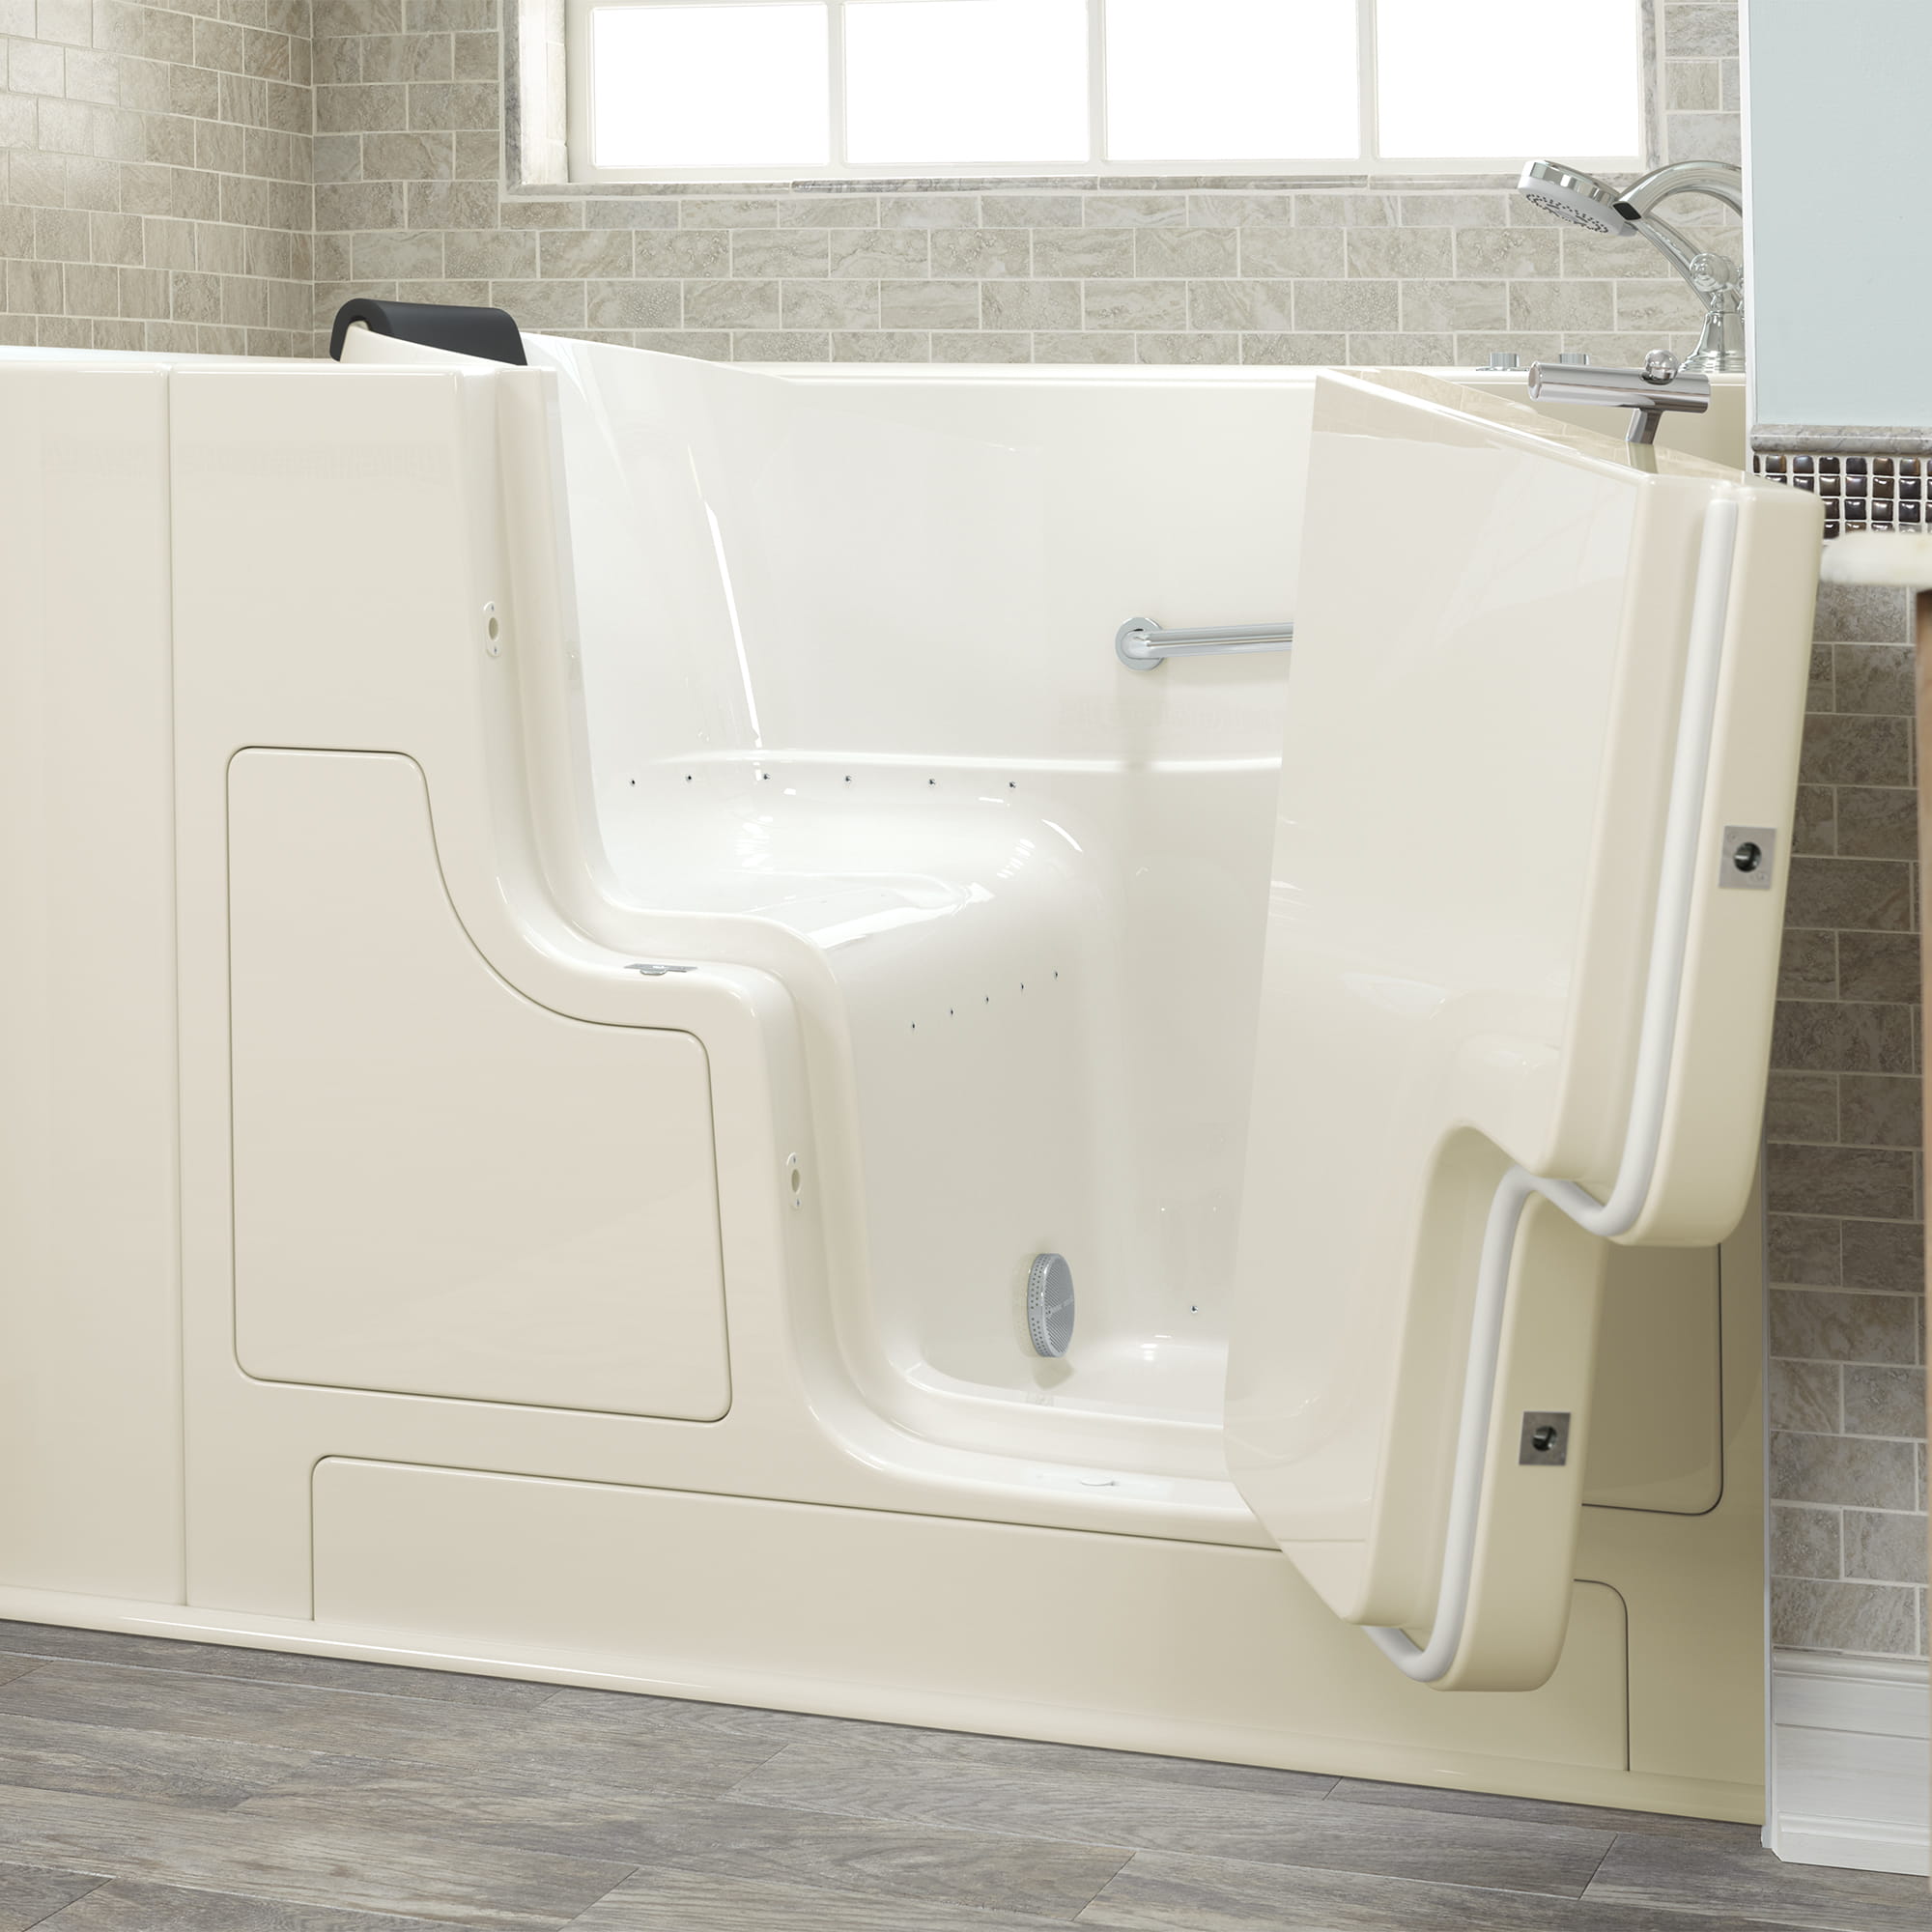 Gelcoat Premium Series 30 x 52 -Inch Walk-in Tub With Air Spa System - Right-Hand Drain With Faucet